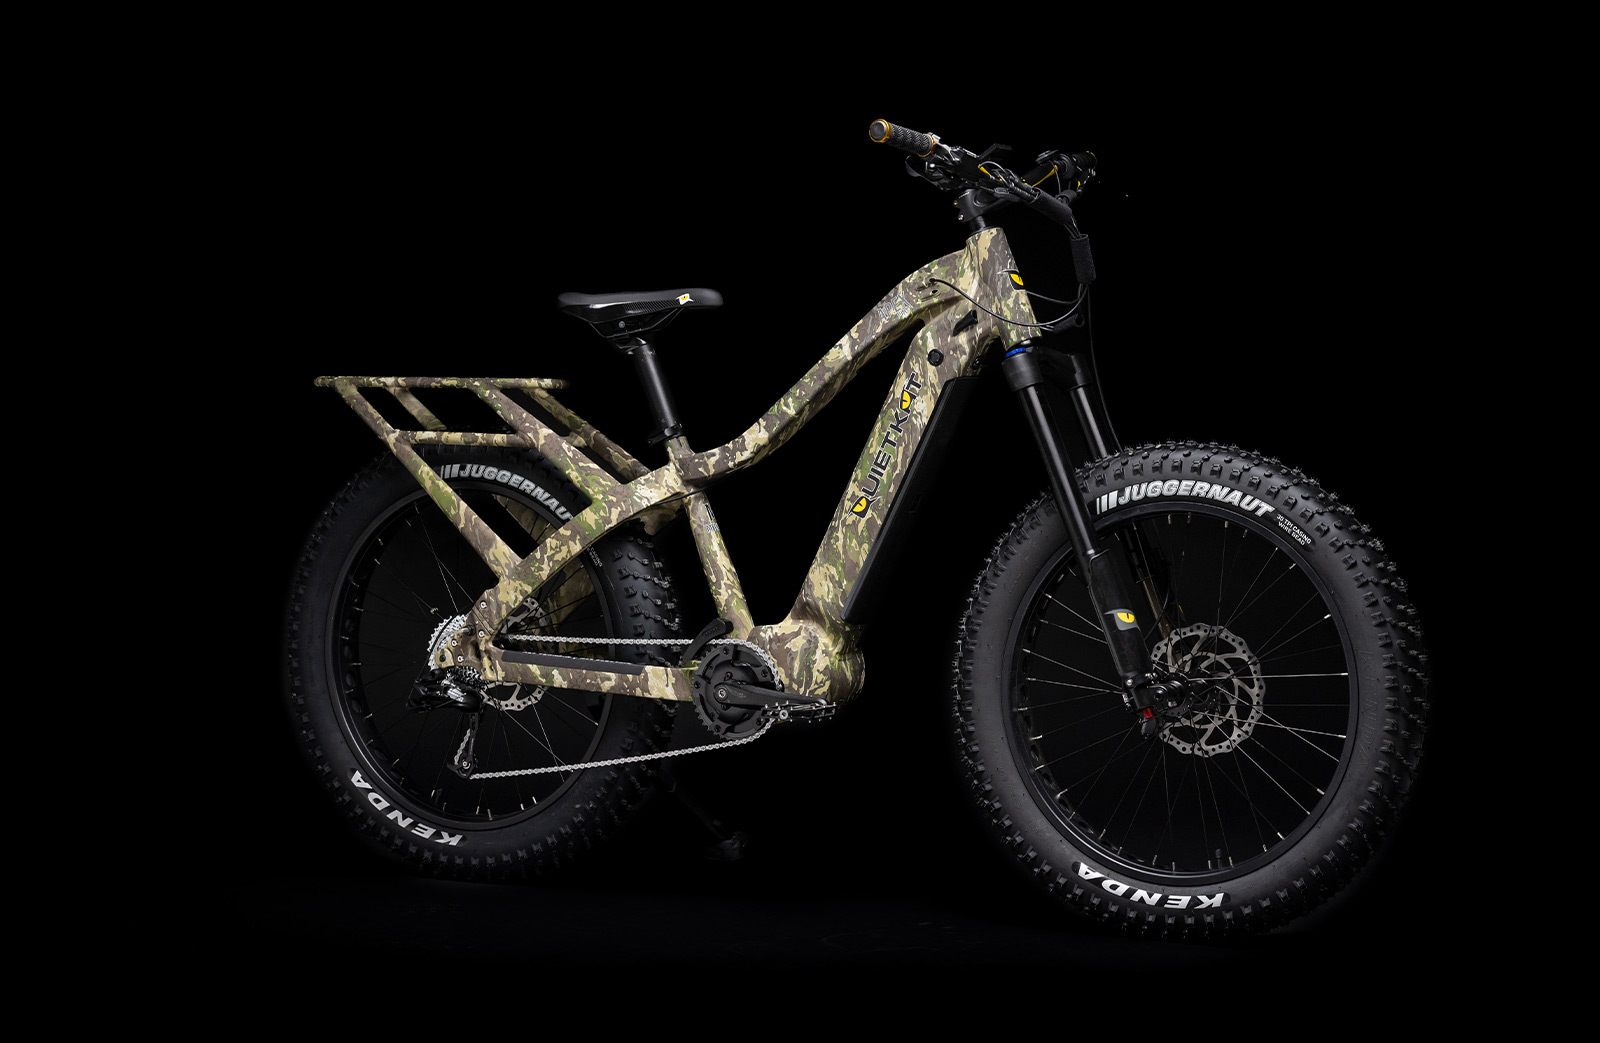 Quiet Kat camo colored e-bike for hunting on a black background